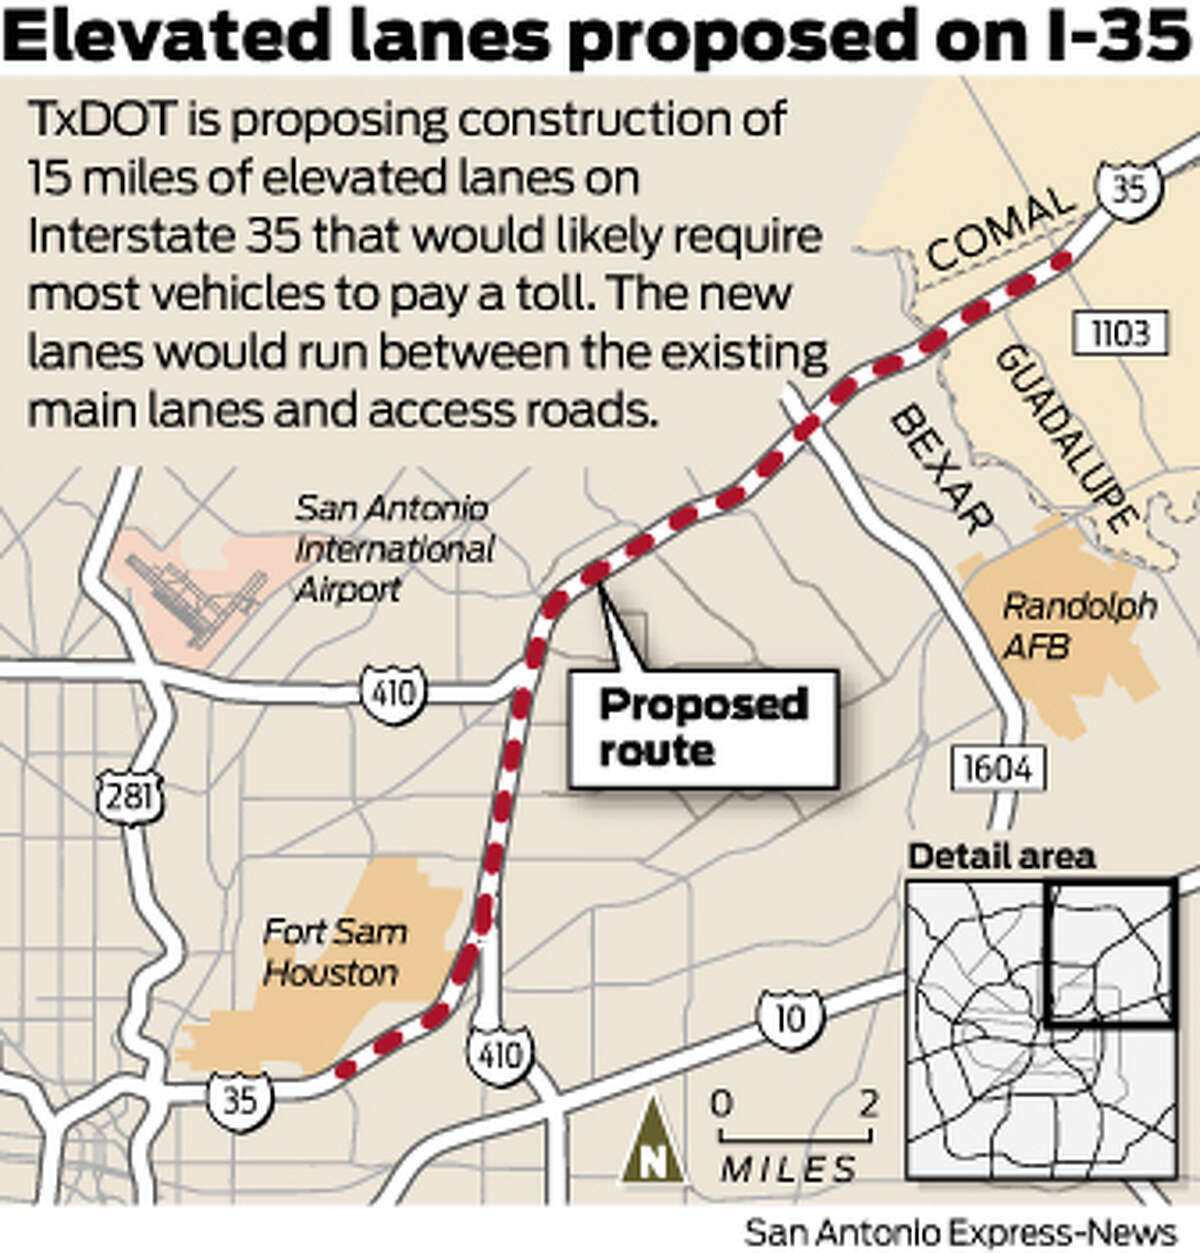 Tolls could be part of new lanes for I-35